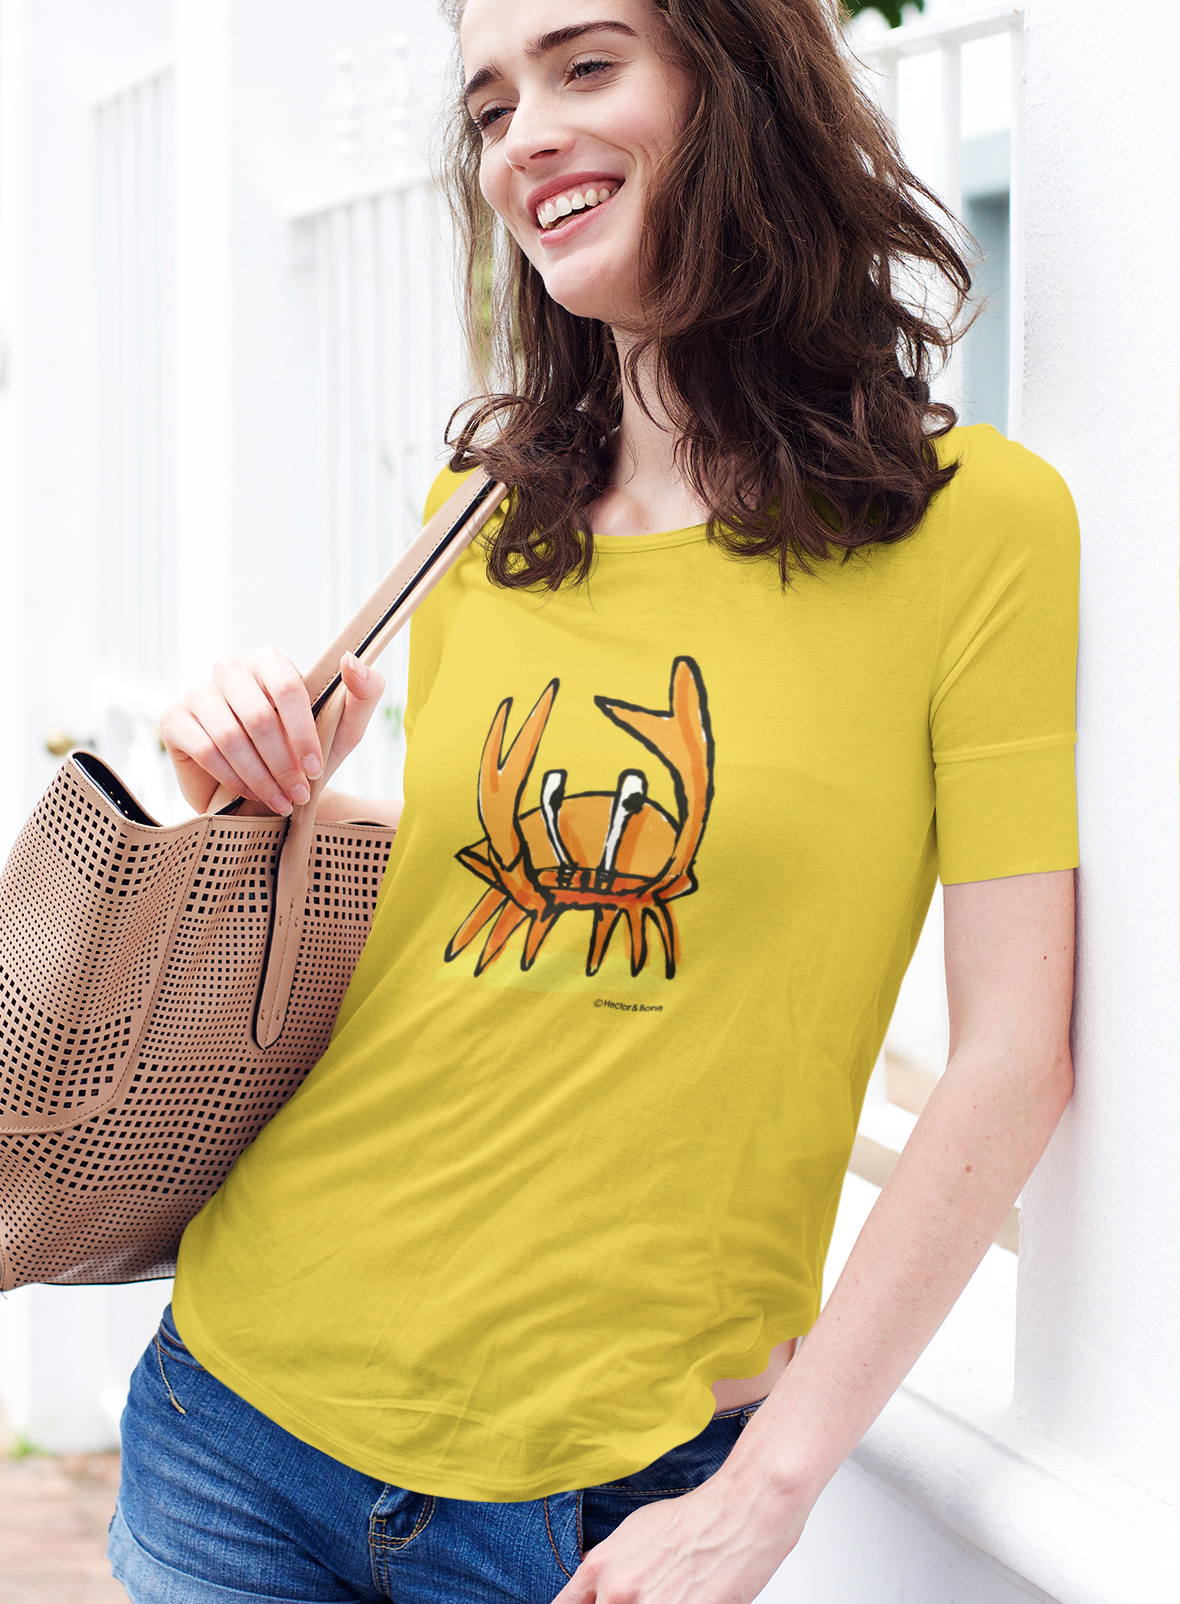 Crab T-shirt - Young woman wearing a illustrated funny Angry Crab t-shirt design on yellow vegan cotton by Hector and Bone